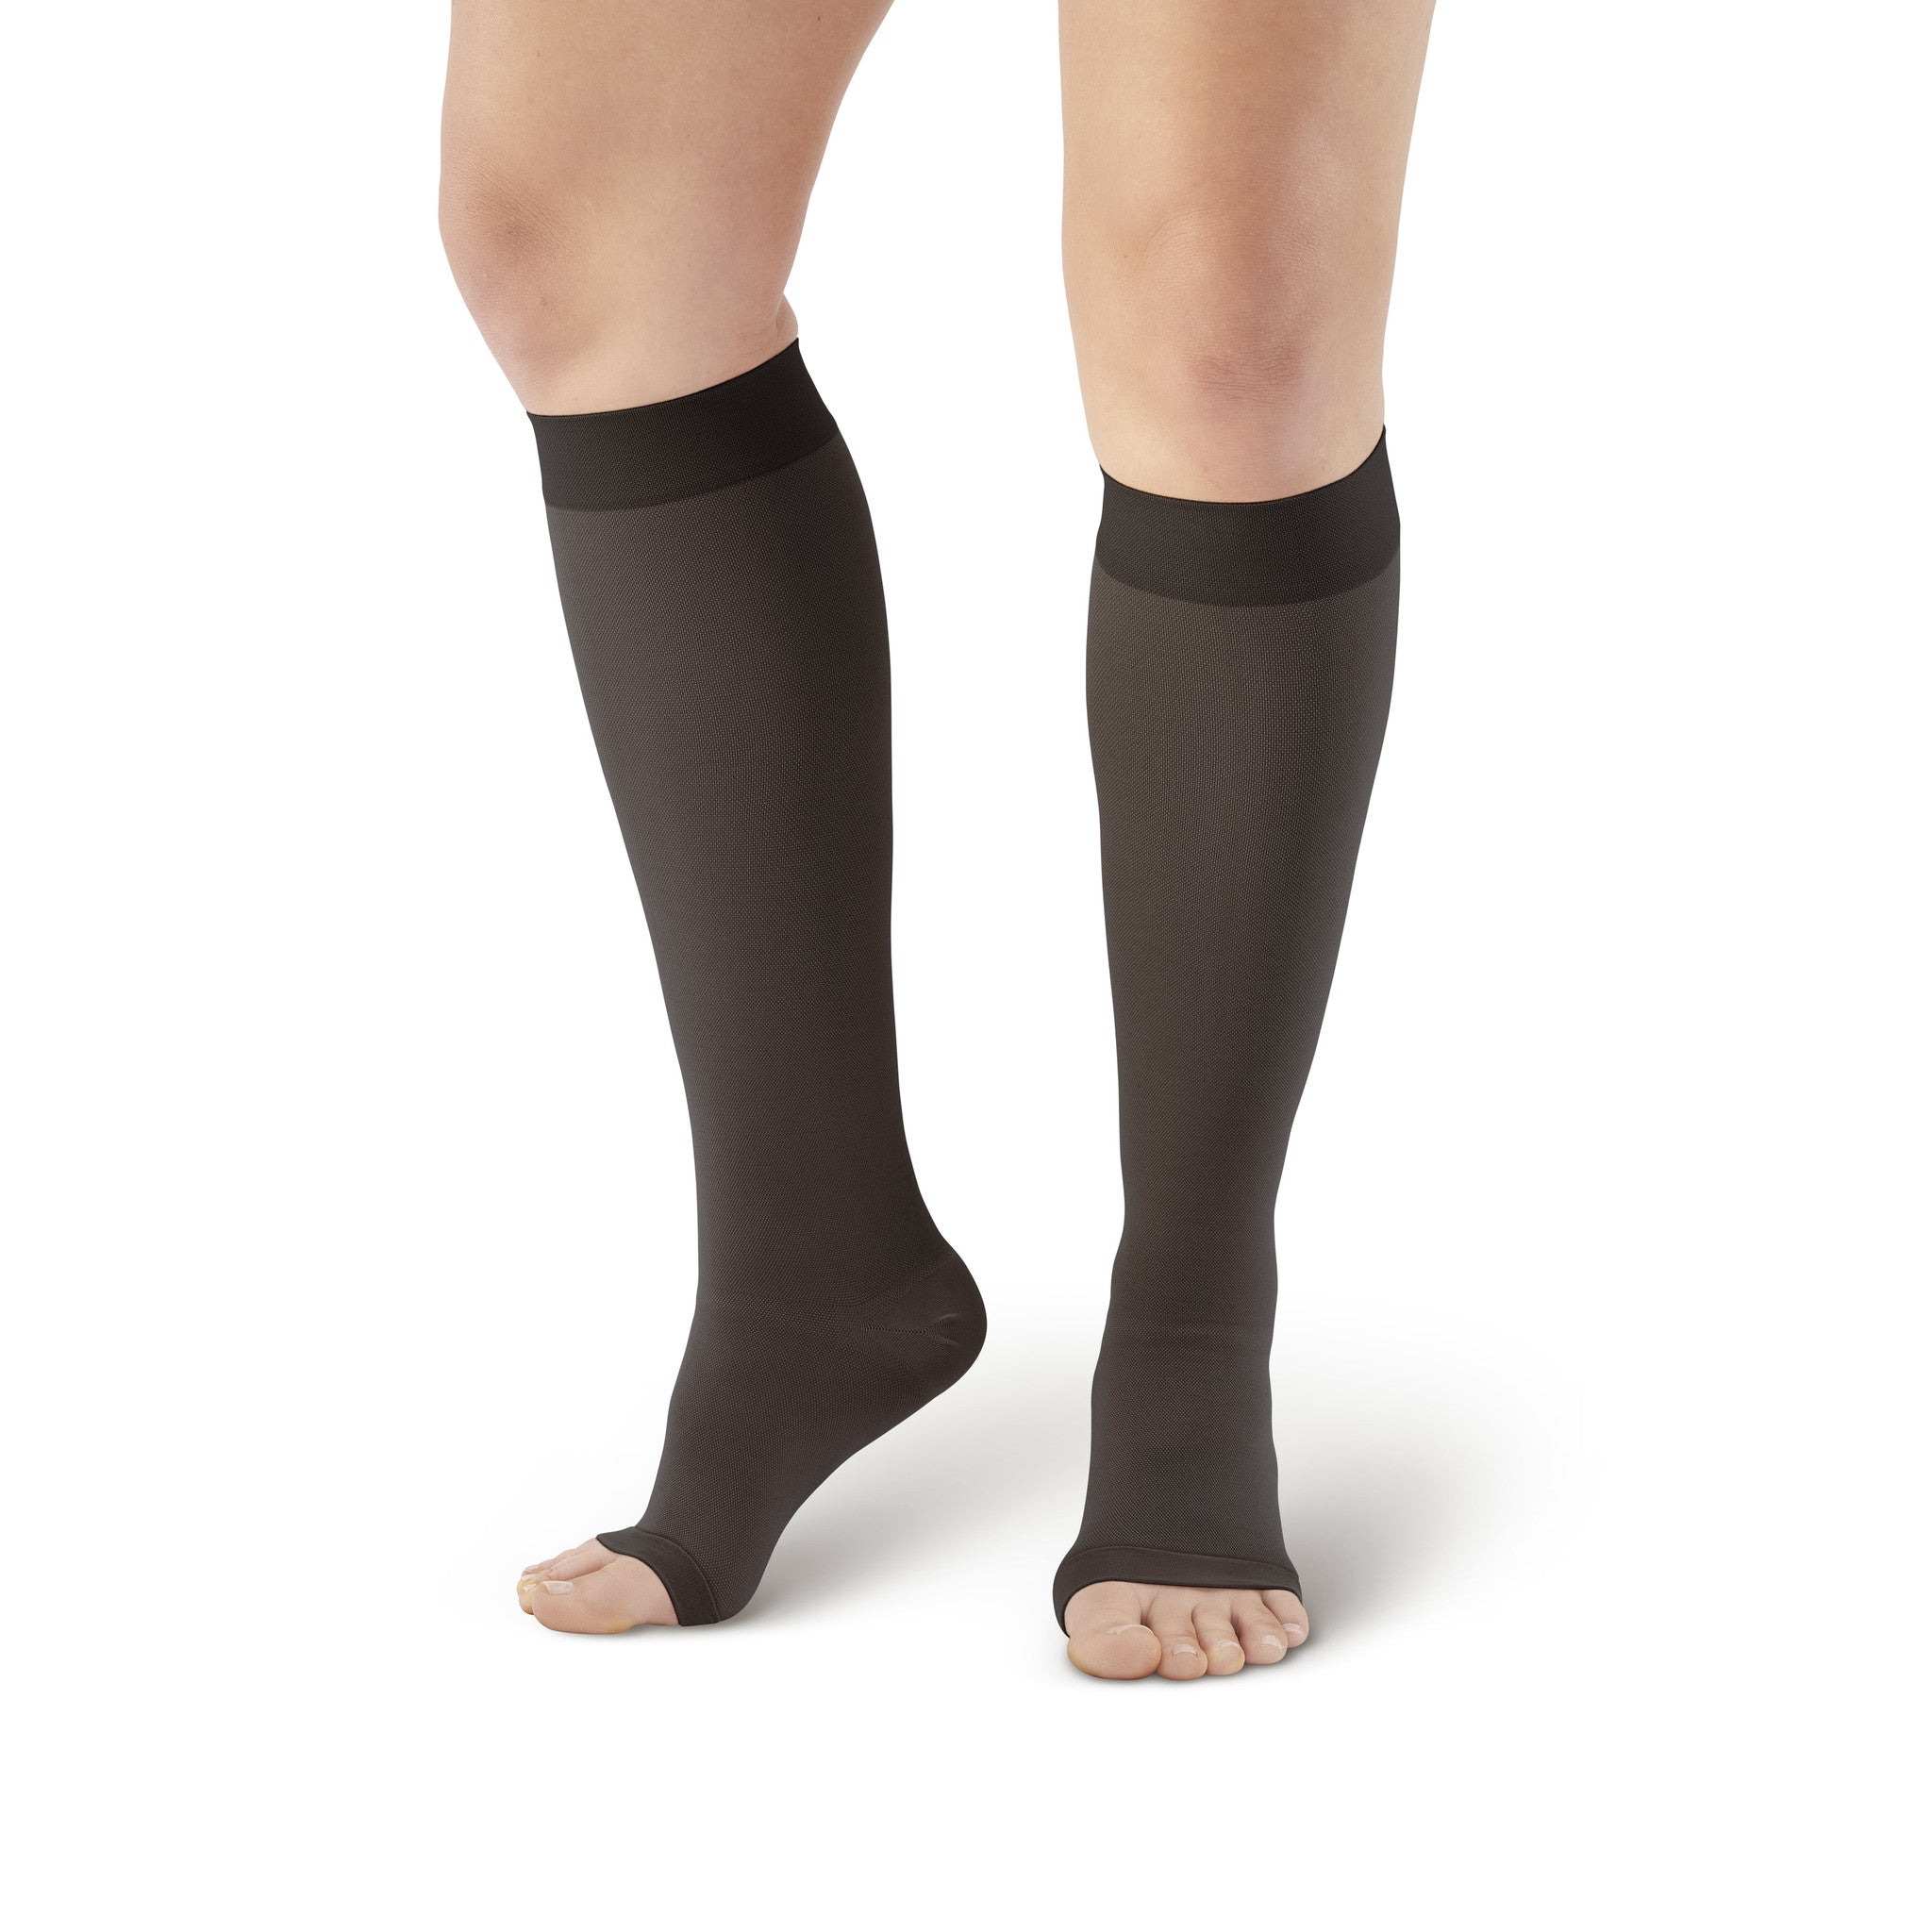 Medical Elastic Stockings Elastic Stockings Ankle Compression 20